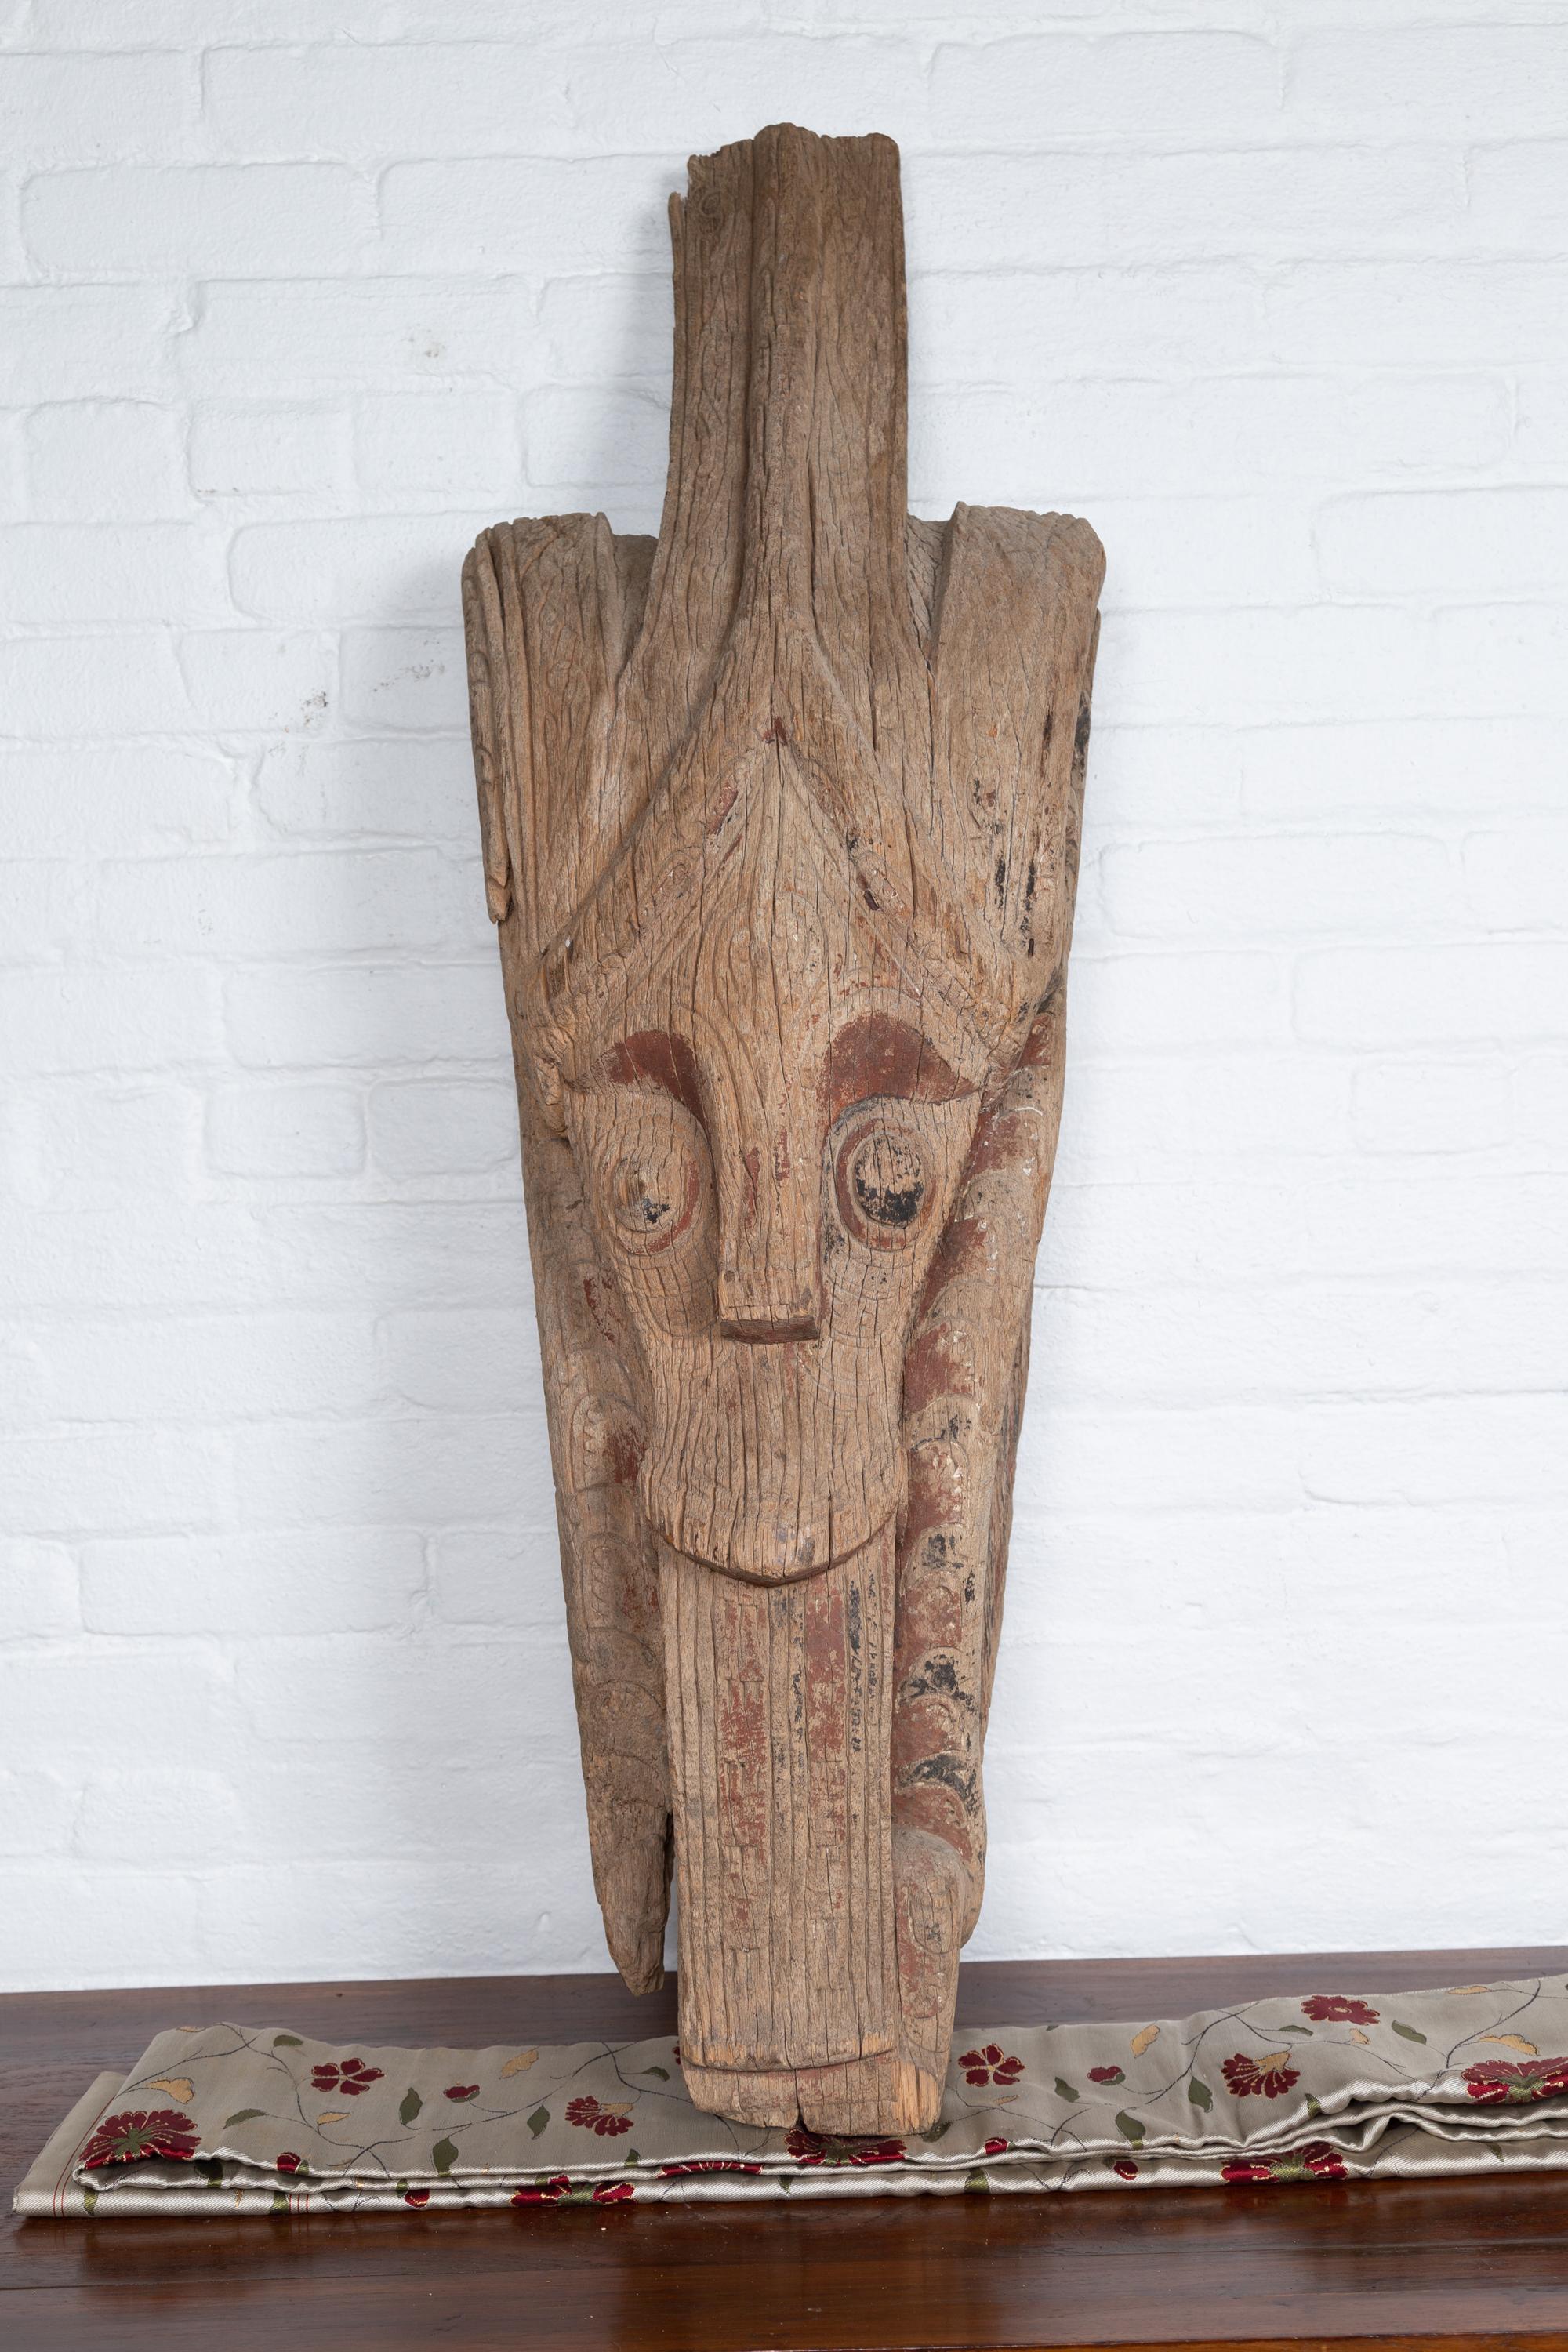 A large antique hand carved tribal sculpture from the Batak People, northern Sumatra, called a Singa Singa. Attracting our eye with its charismatic presence, this large hand carved sculpture from the Indonesian island of Sumatra is one of the most